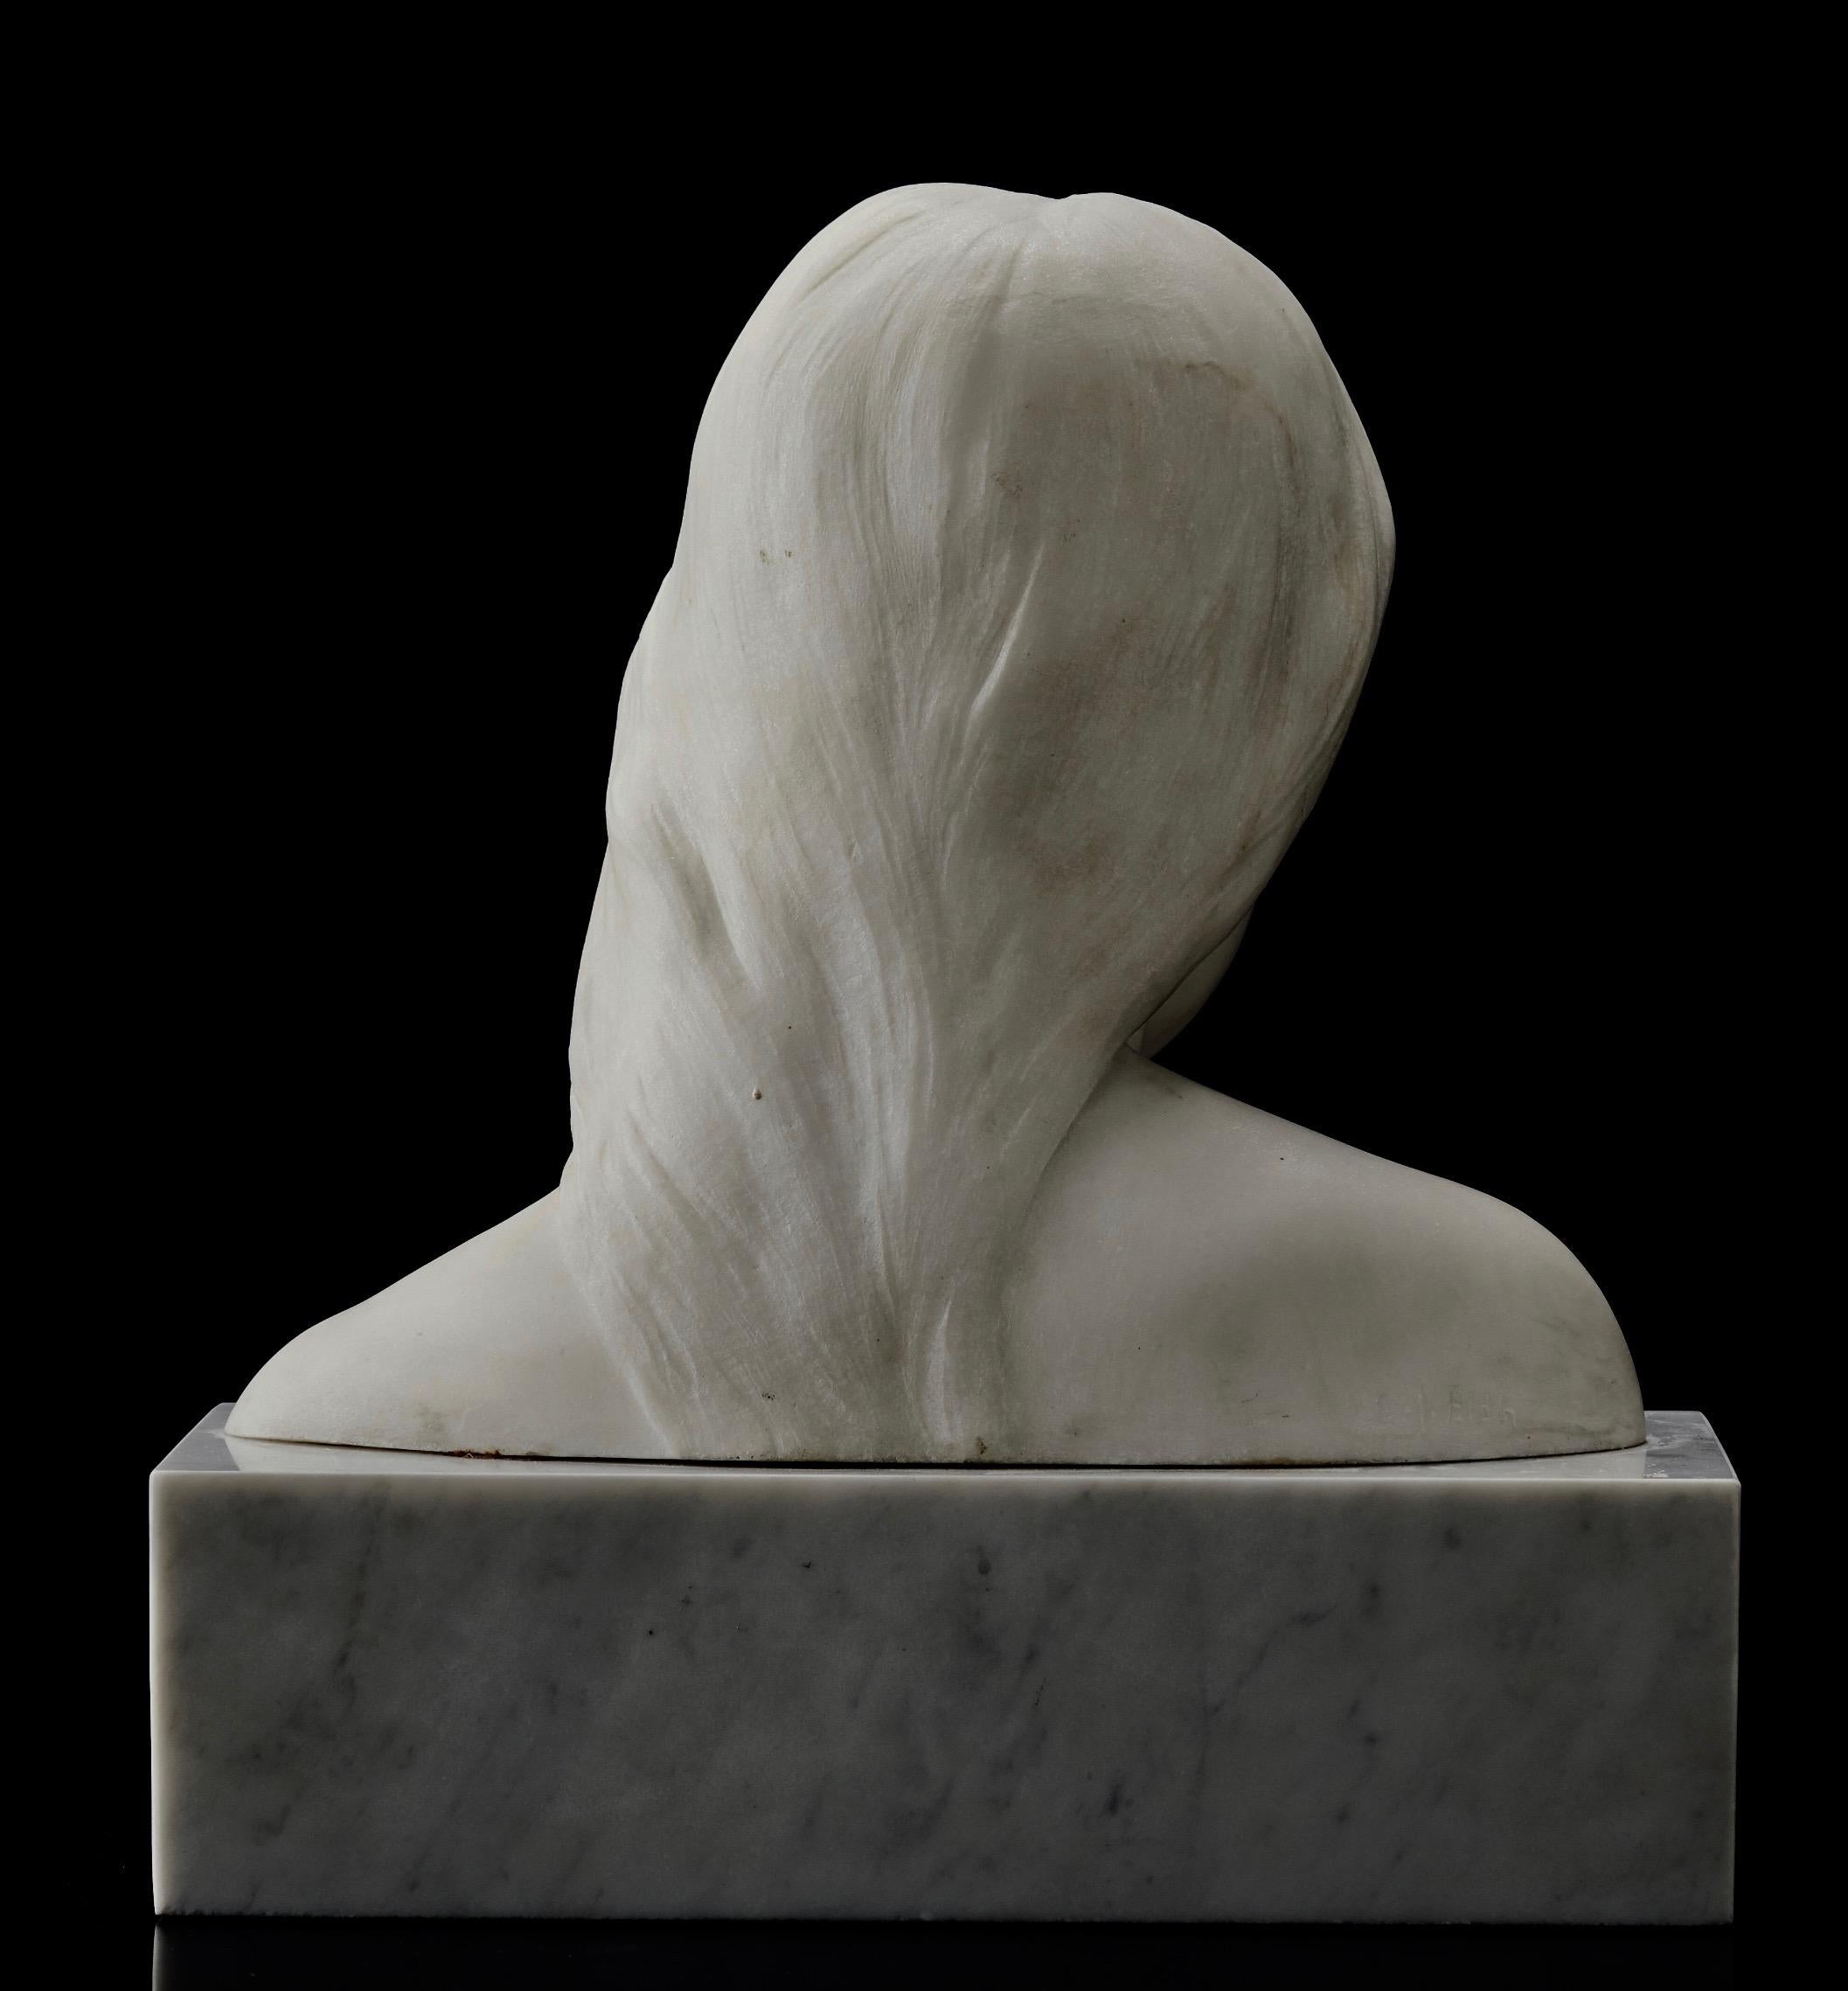 A charming marble sculpture by the Swedish artist and sculptor Carl Eldh. He had a studio in the most beautiful place in Stockholm which today is a Museum totally focused on his works.
Signed C. J. Eldh.